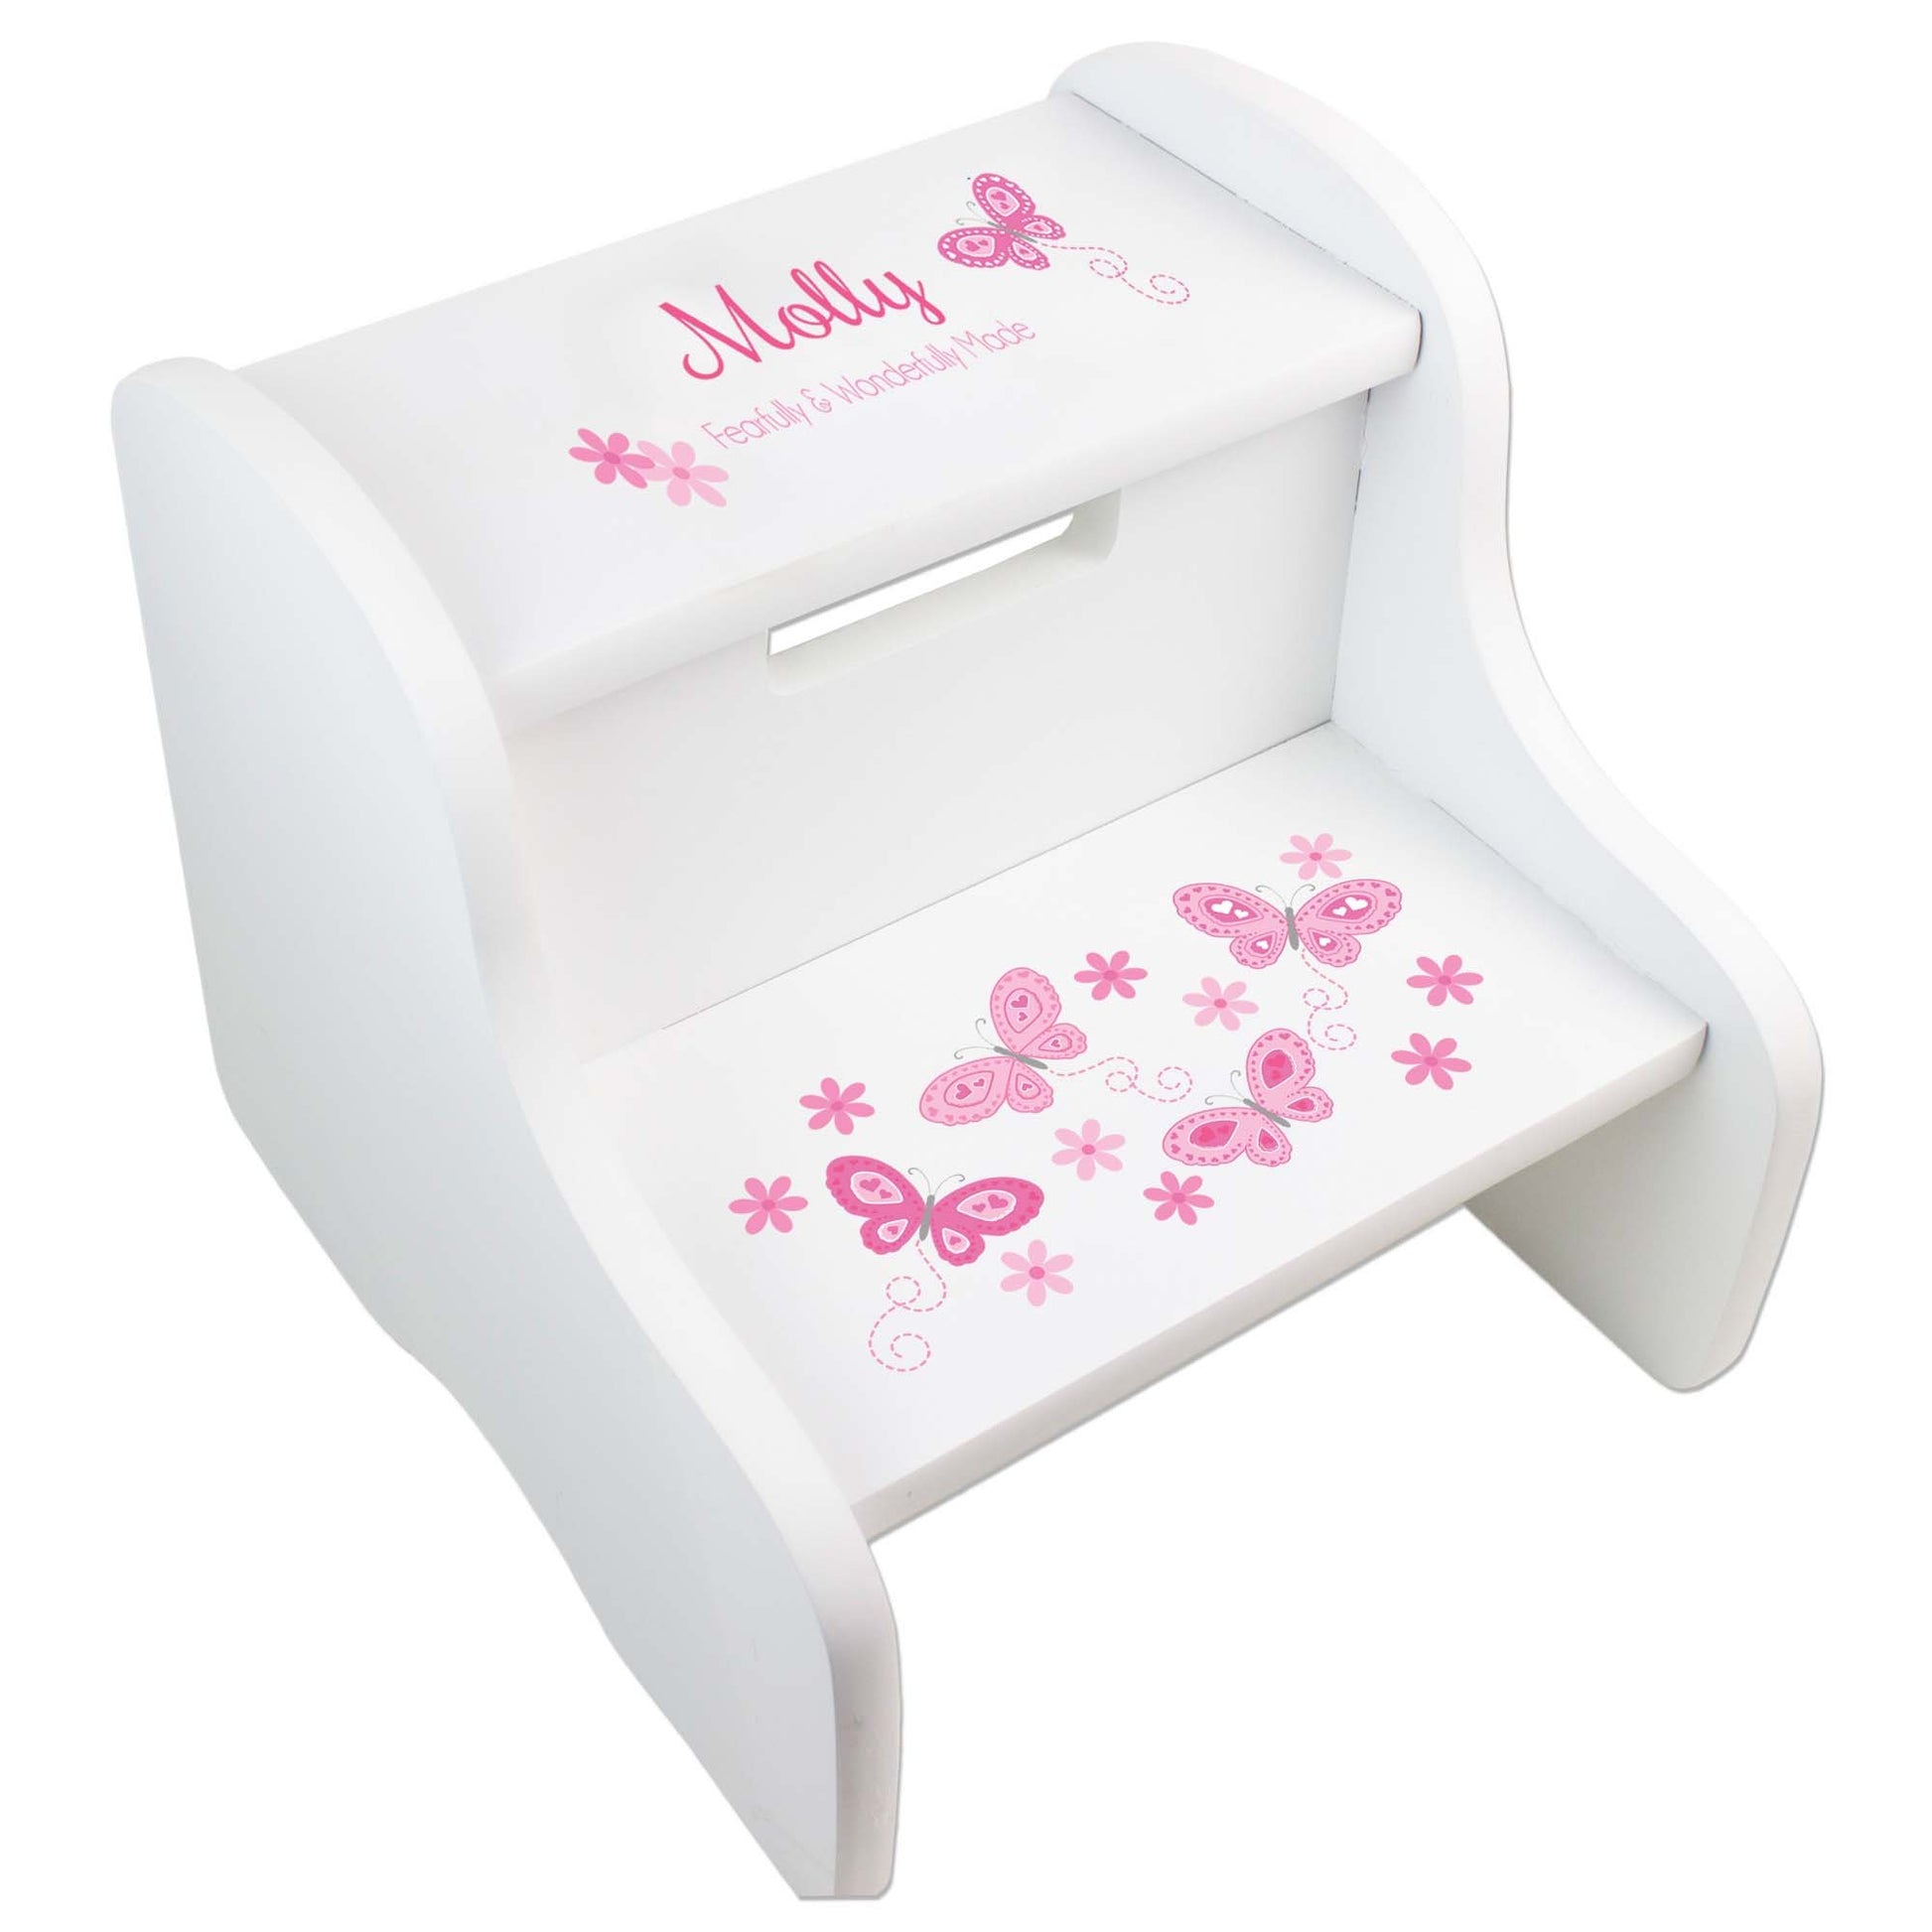 Personalized White Step Stool With Lavender Butterflies Design